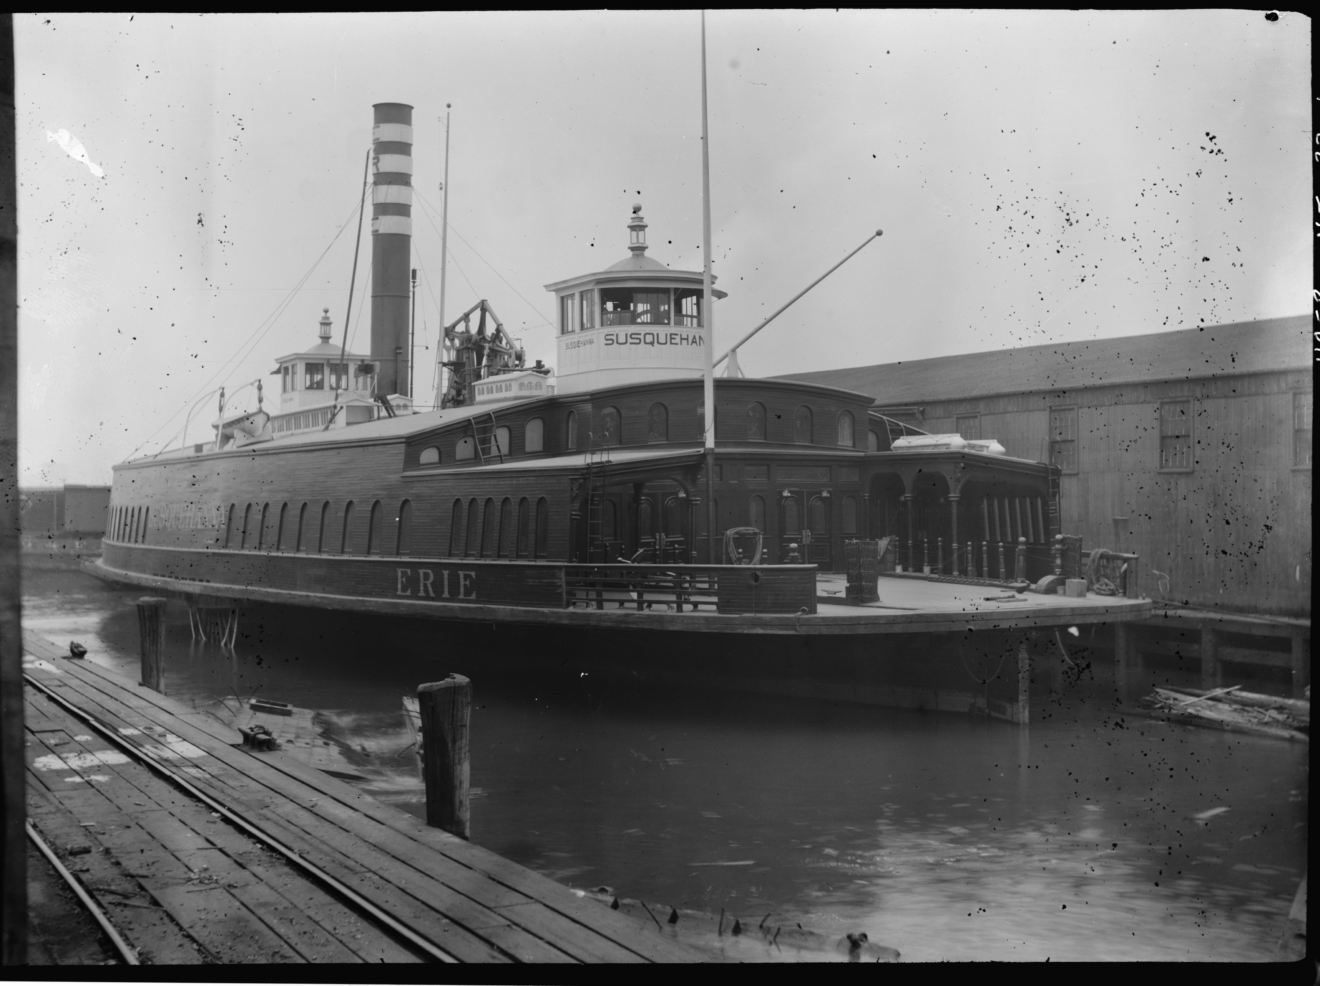 An undated photograph of an Erie-owned ferryboat named the "Susquehanna" docked at the Pavonia Ferry Terminal